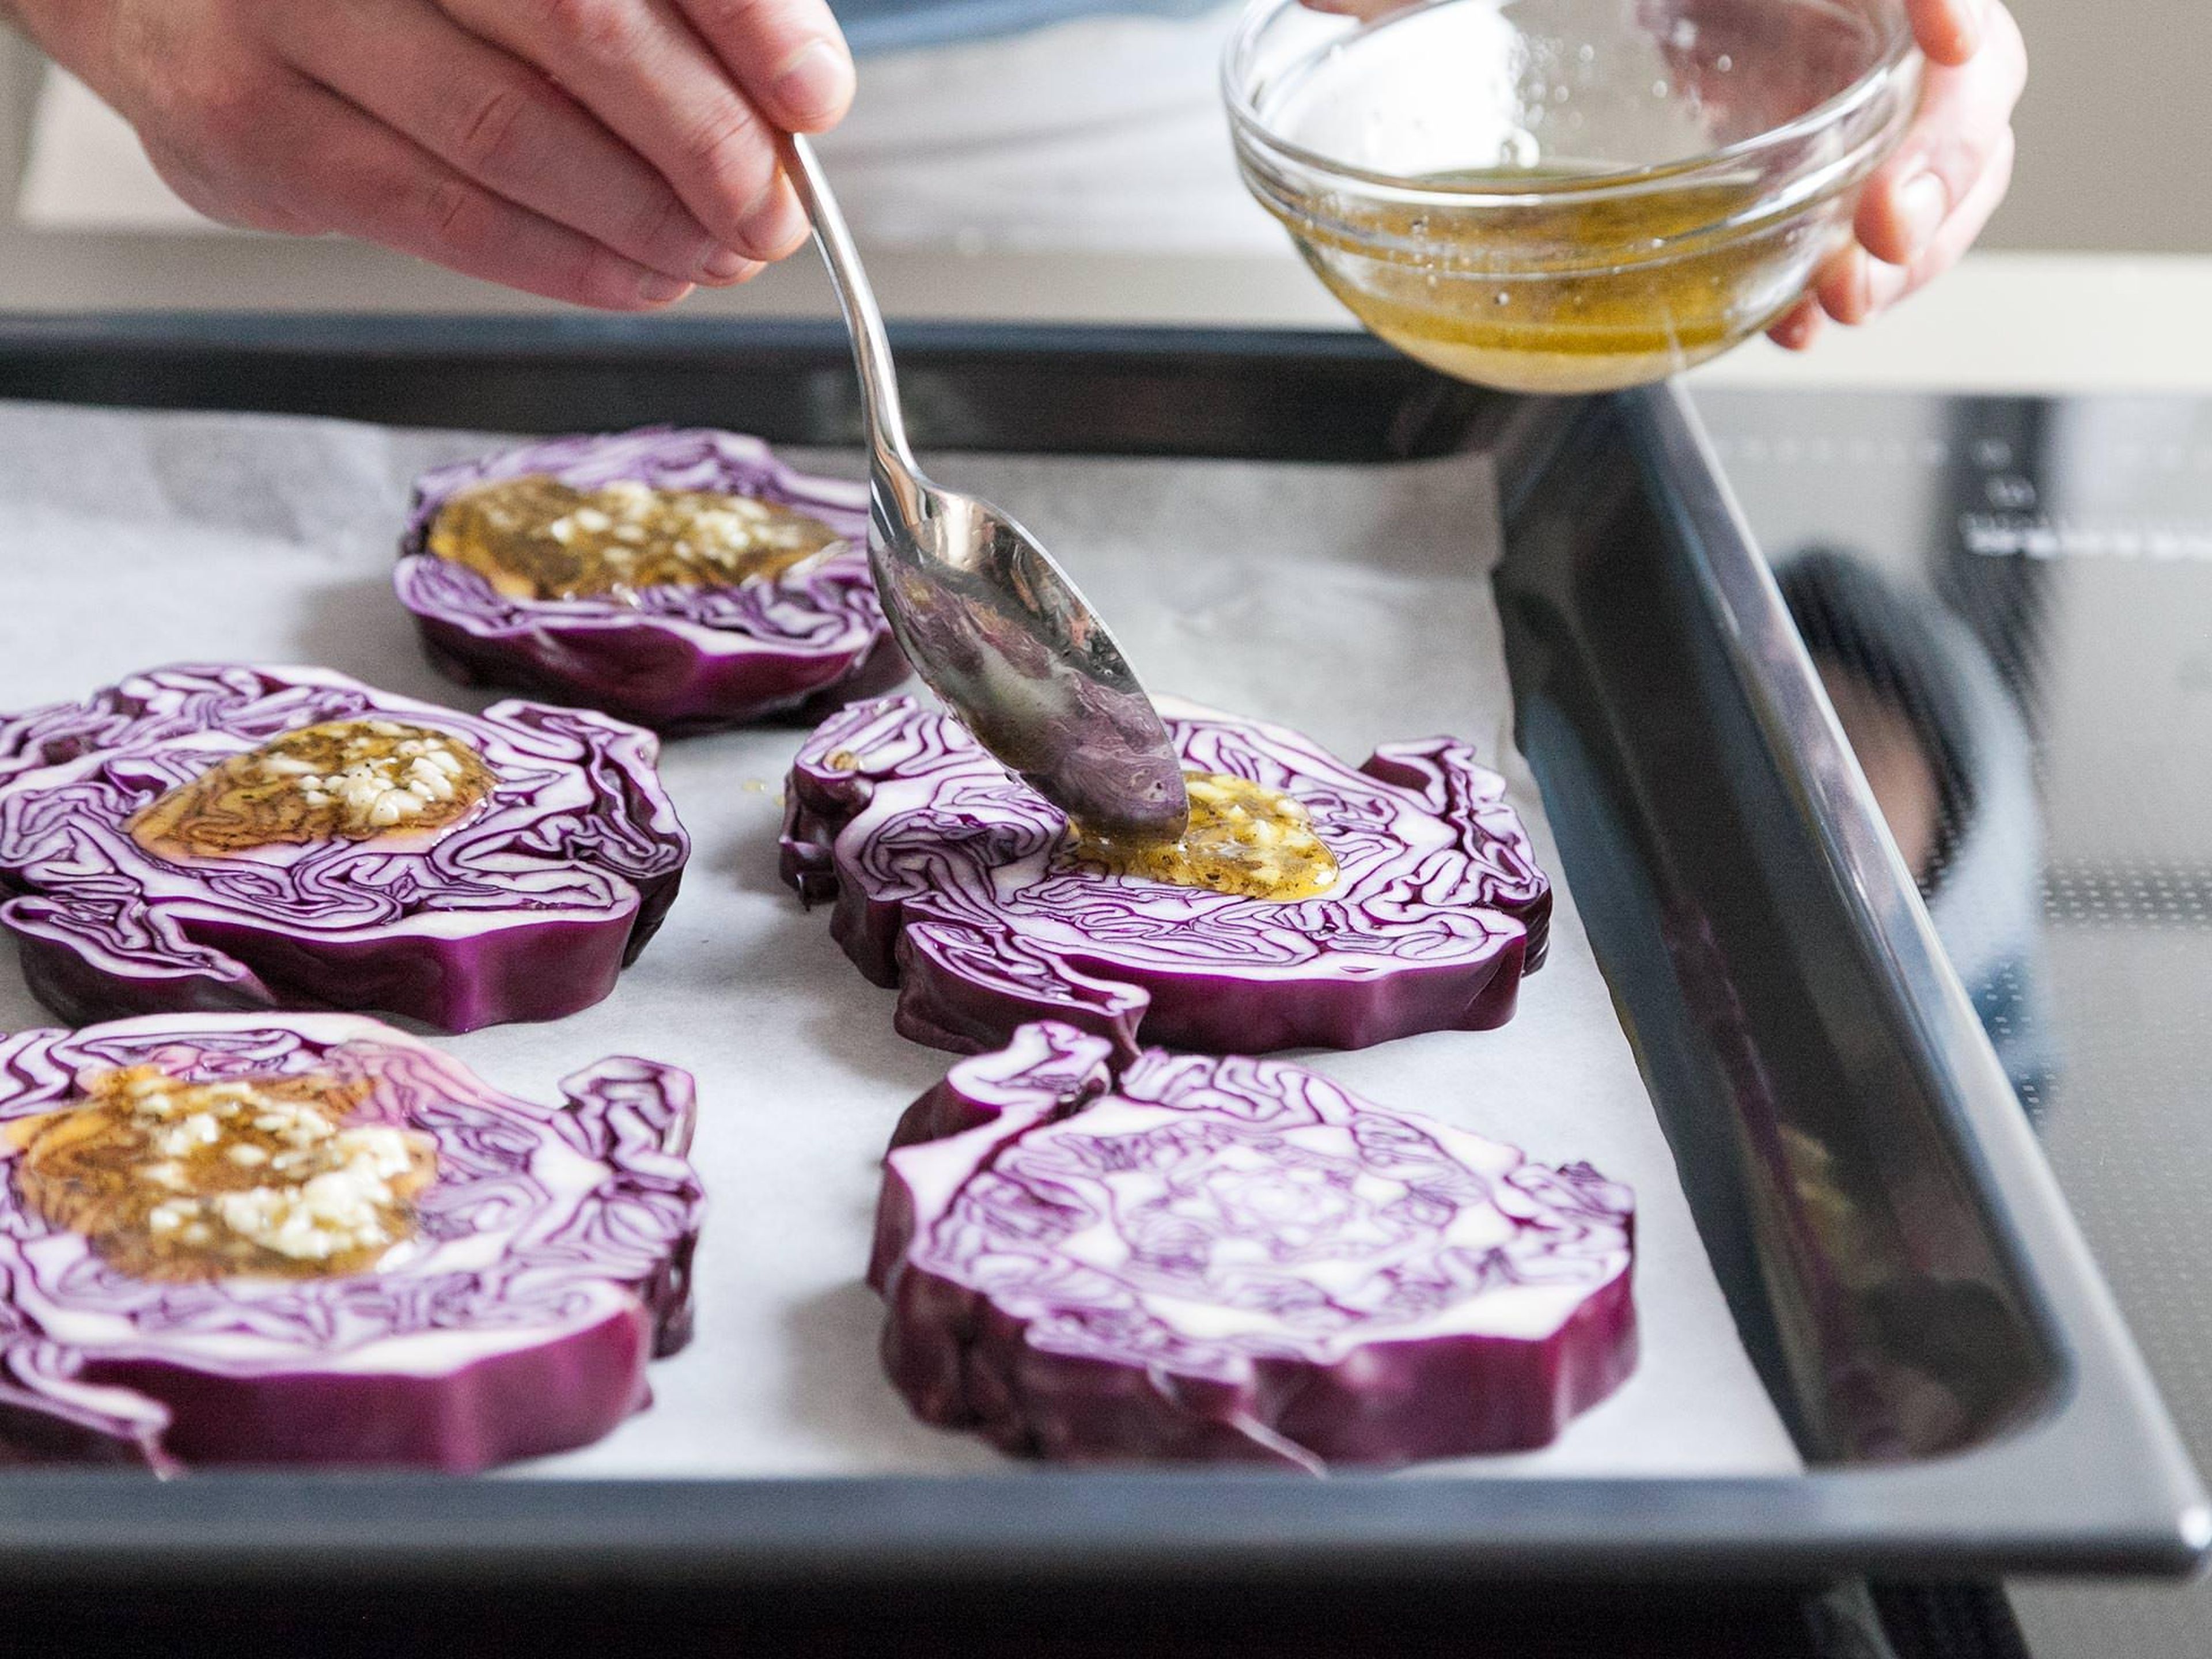 Transfer red cabbage slices onto a parchement-lined baking sheet and brush with garlic-oil mixture.